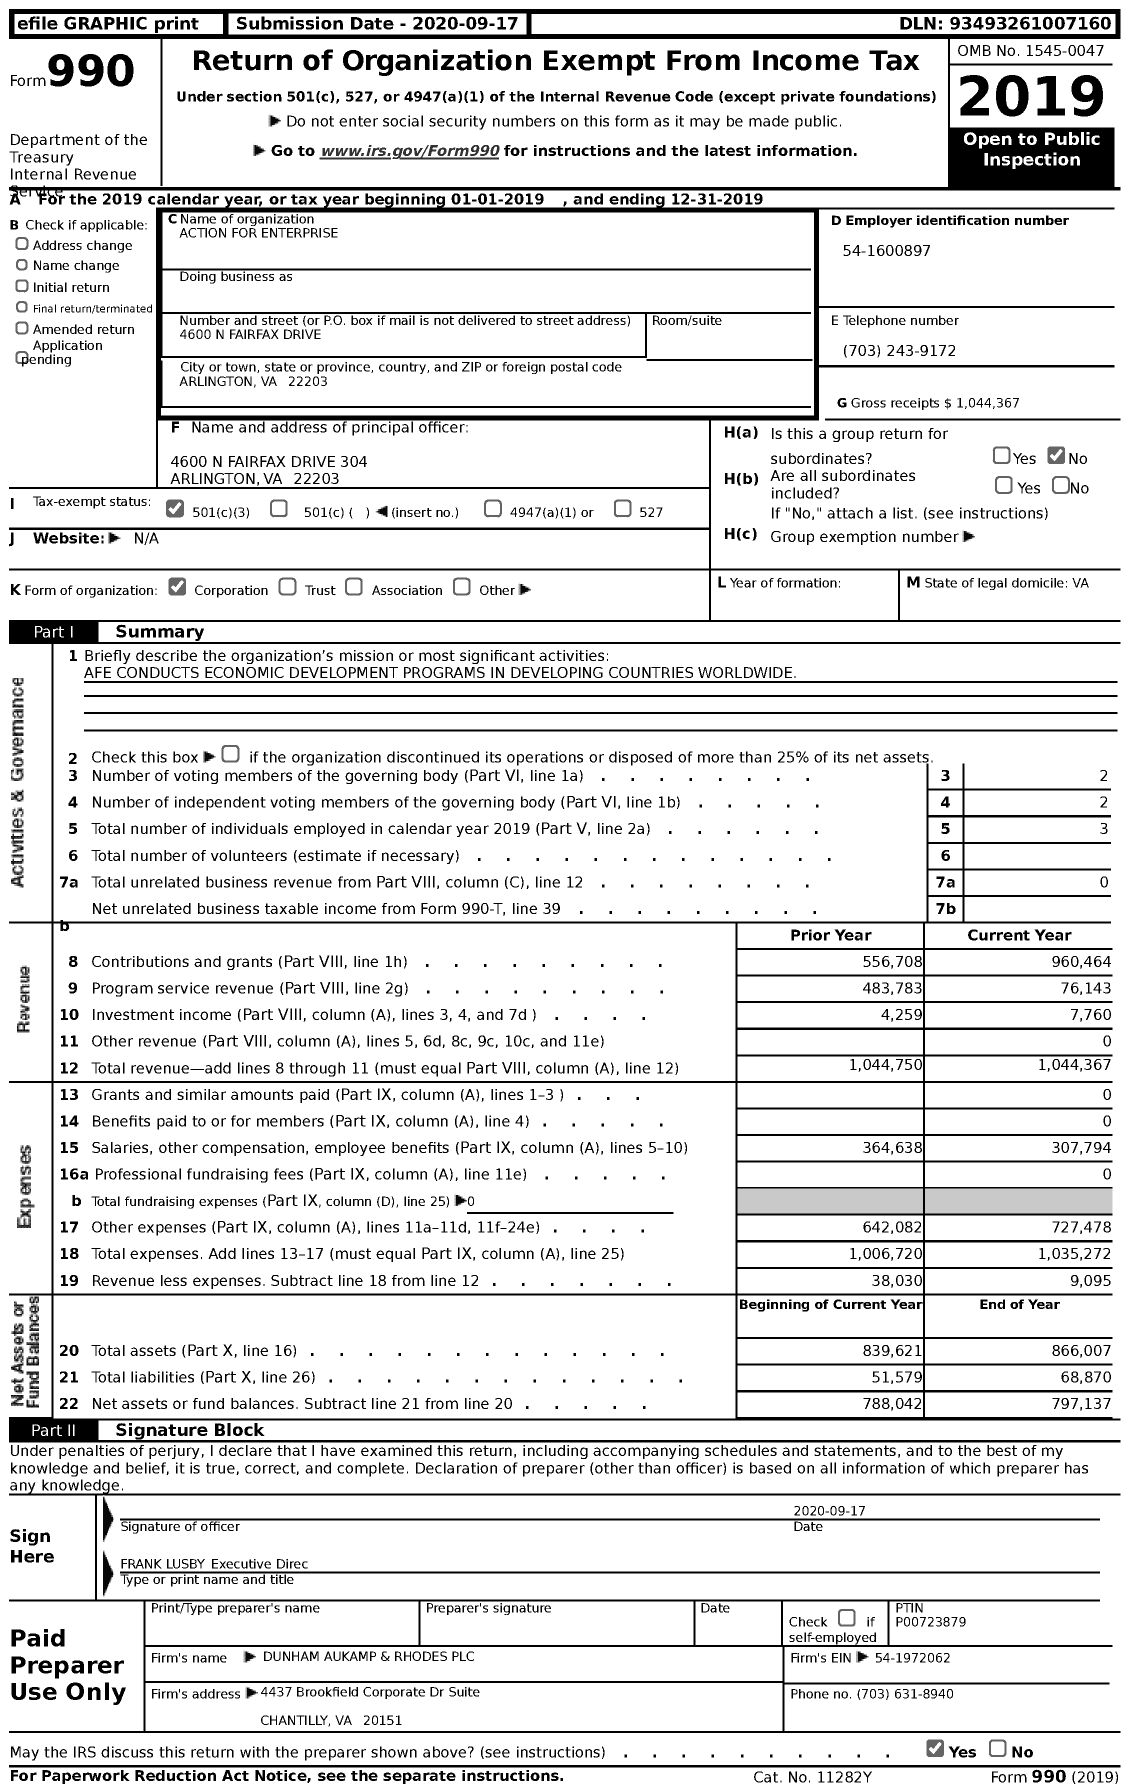 Image of first page of 2019 Form 990 for Action for Enterprise (AFE)